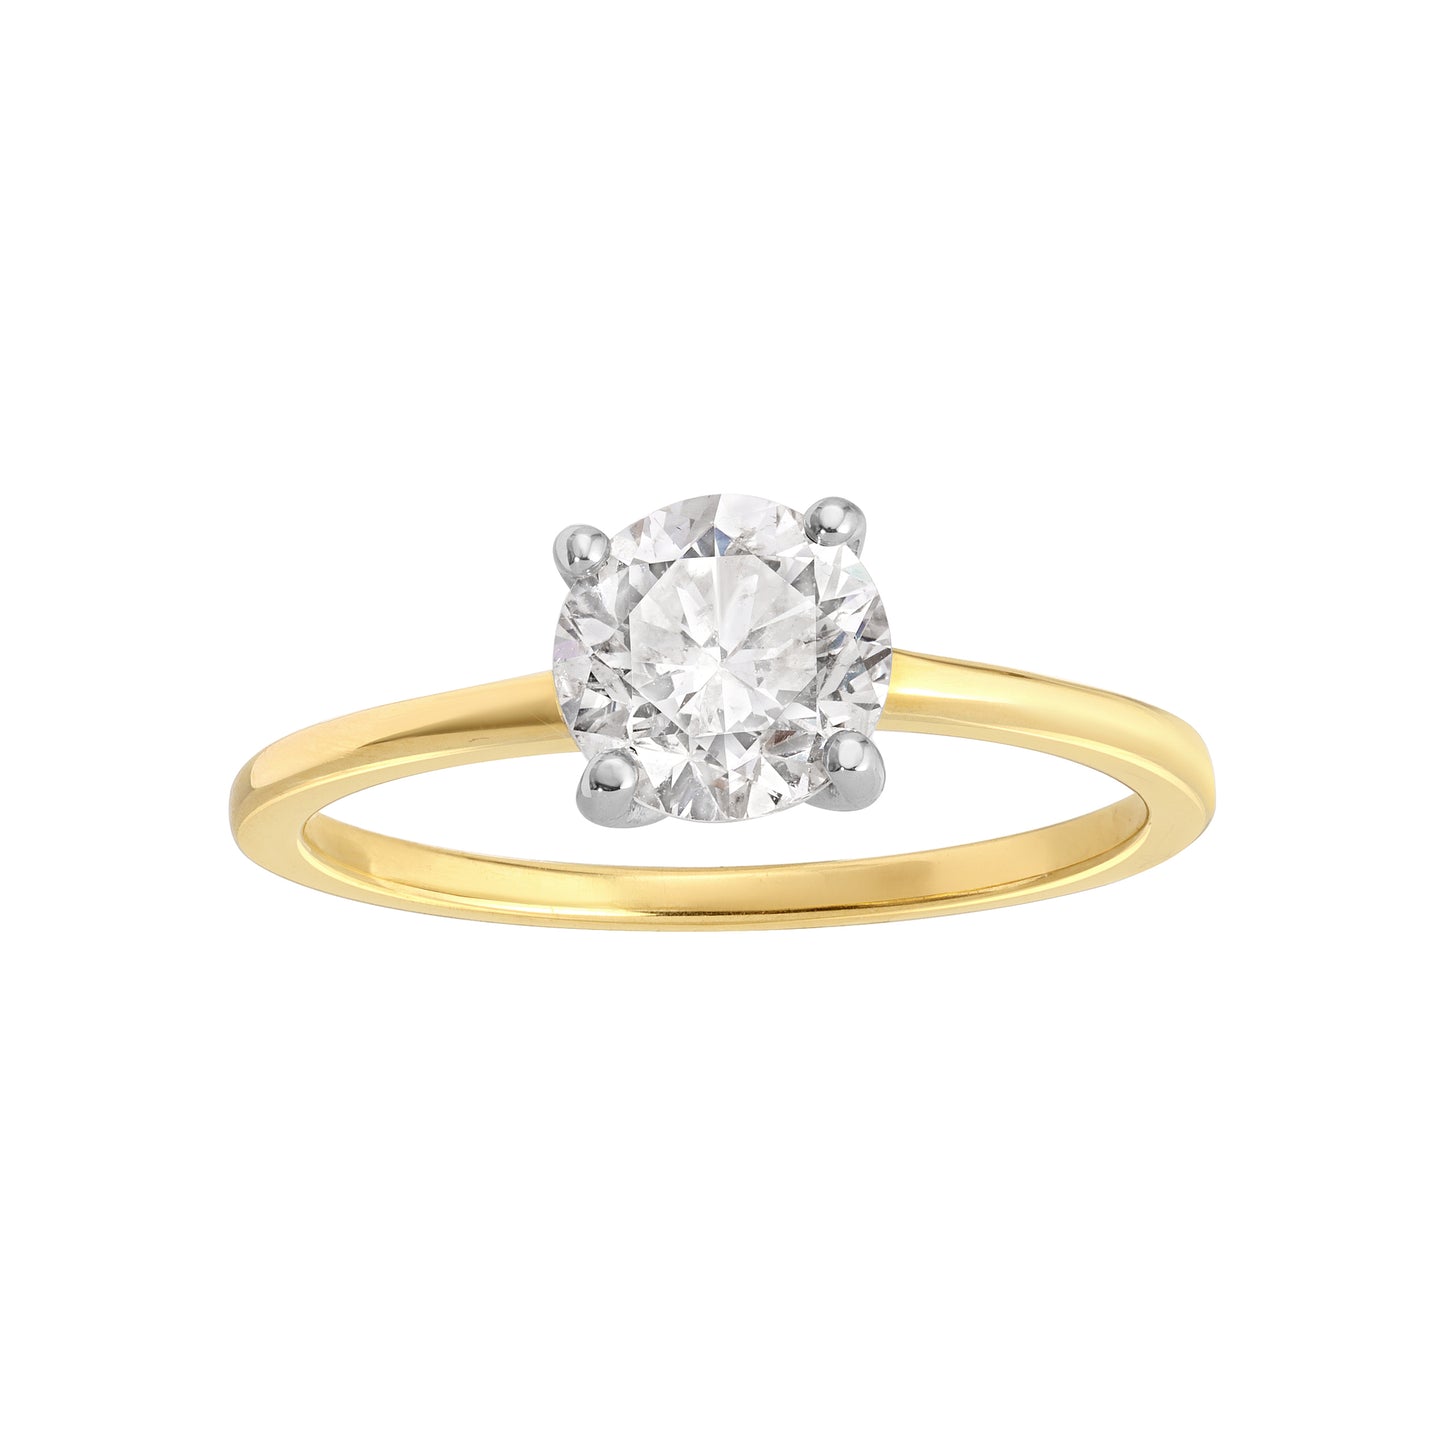 DIAMOND SOLITAIRE YELLOW GOLD RING